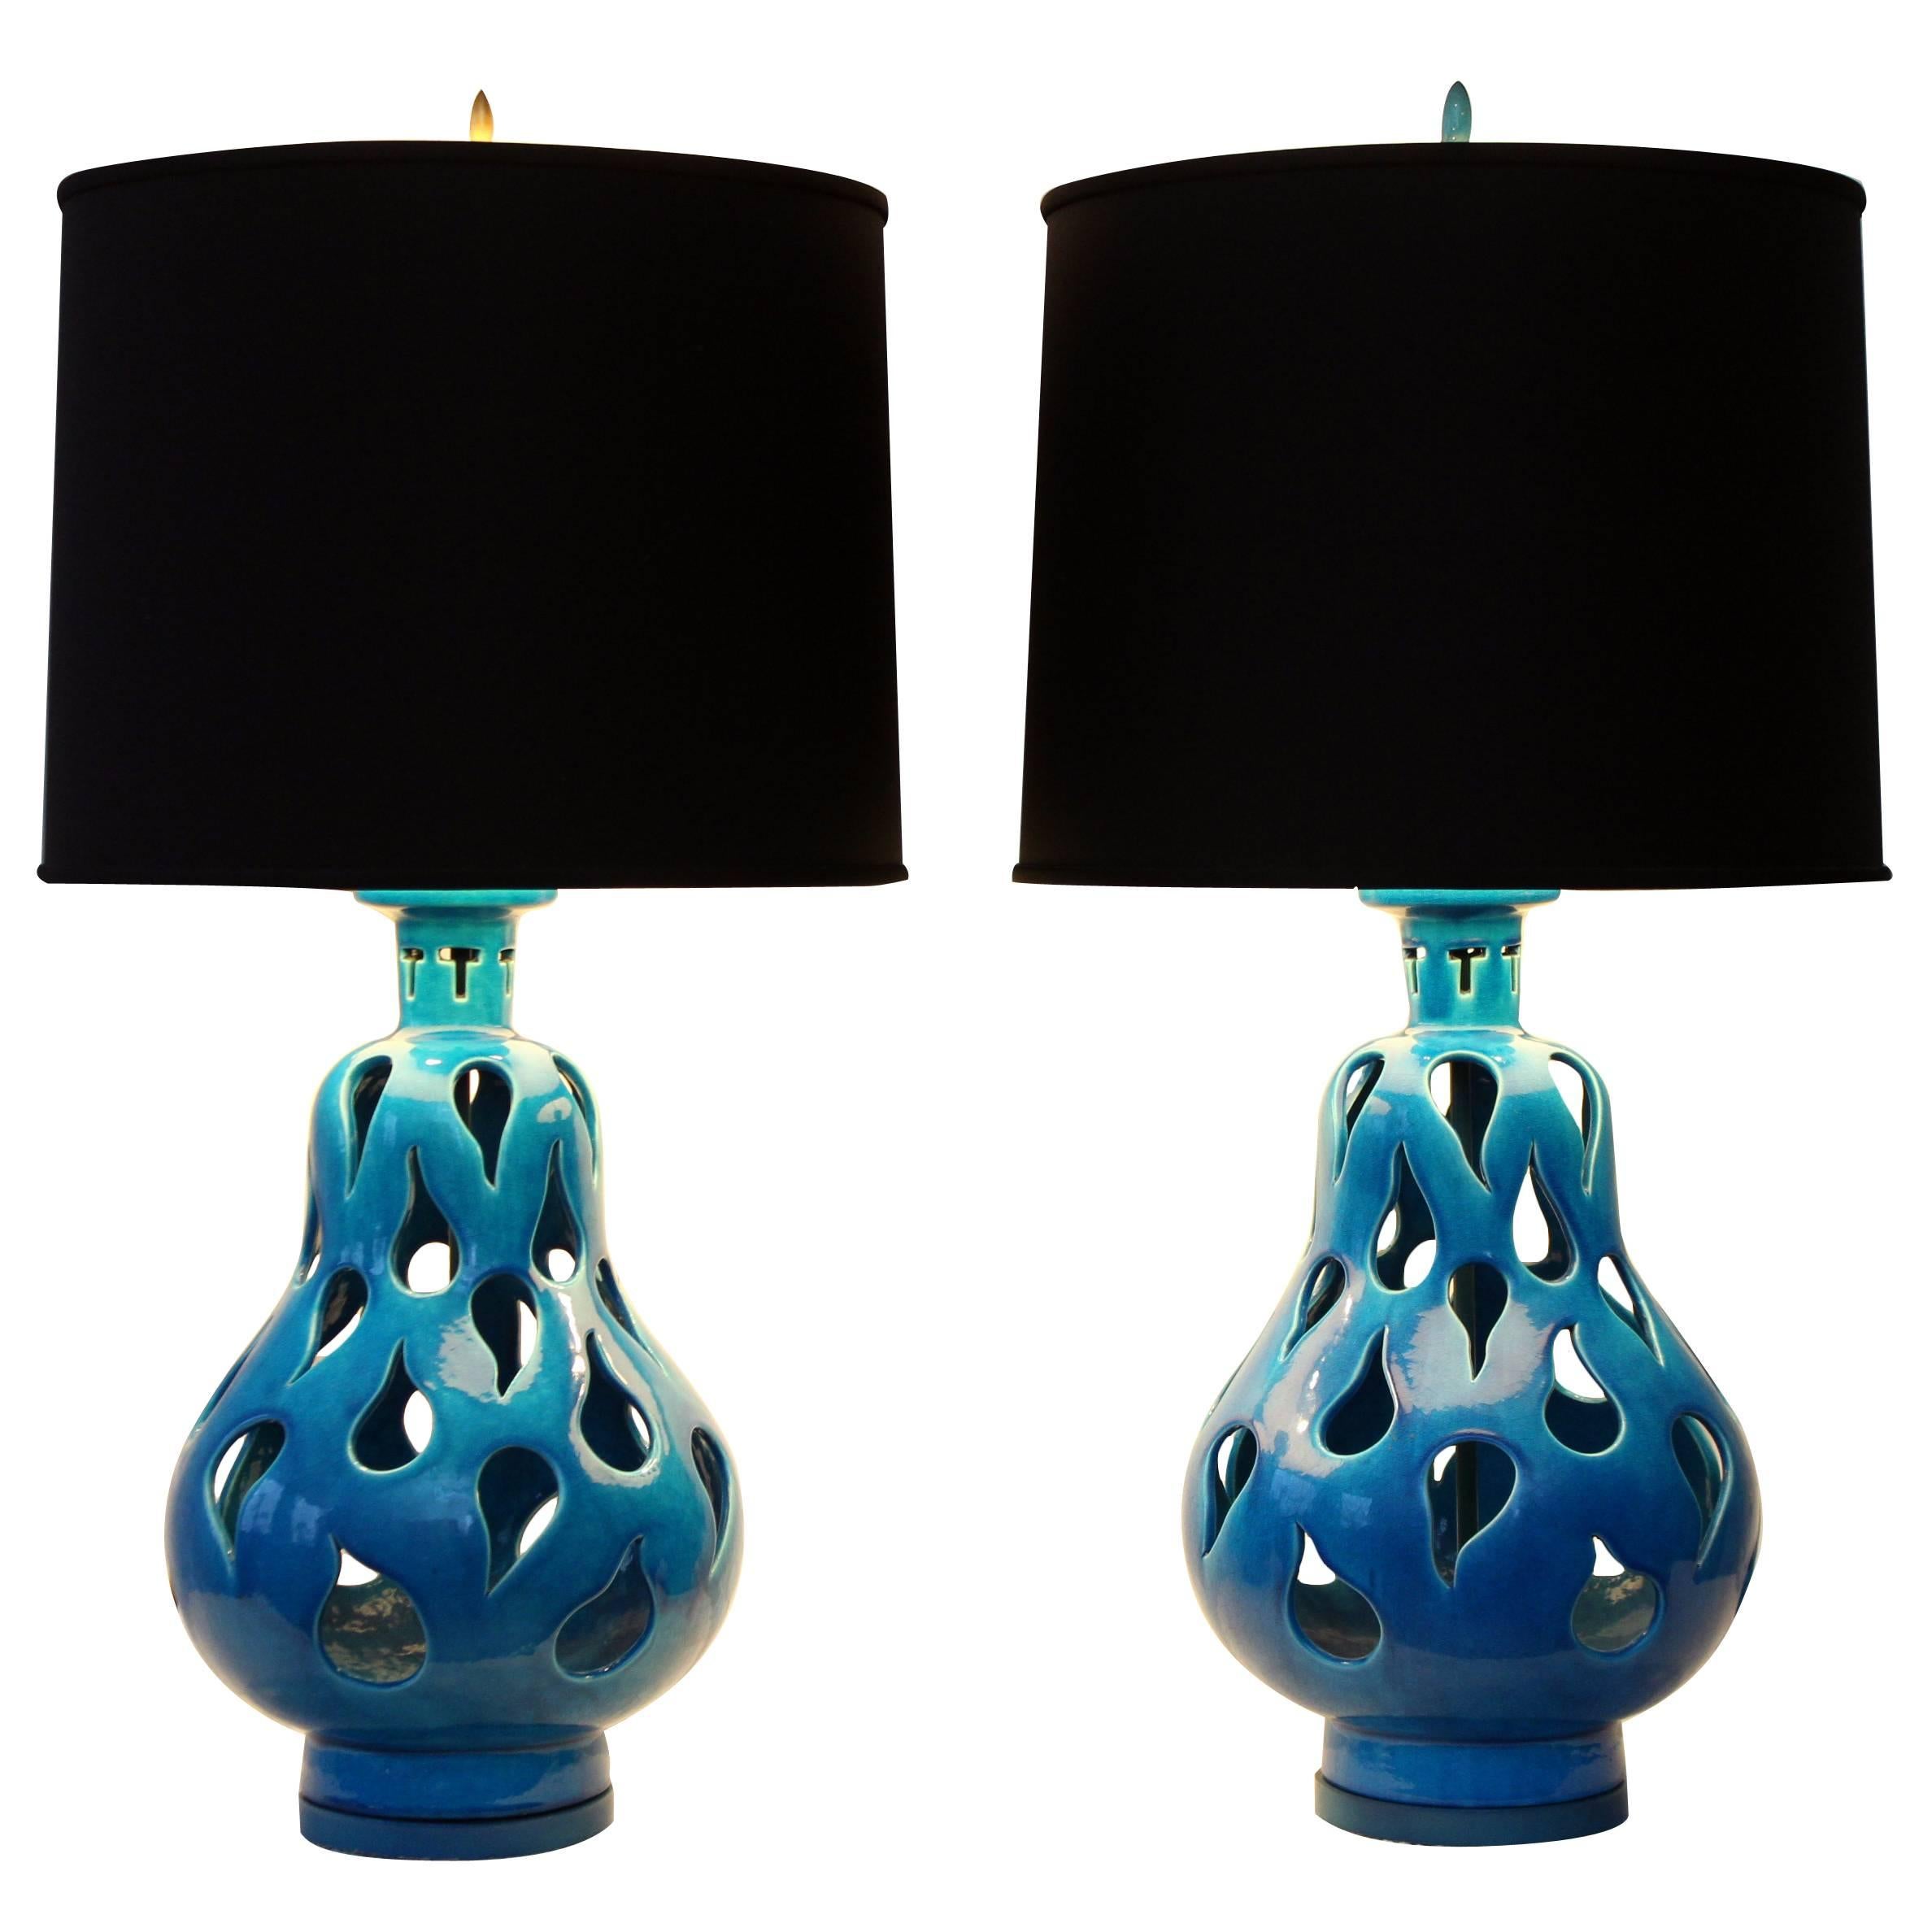 Hermes Blue Paisley Cut-Out Italian Table Lamps